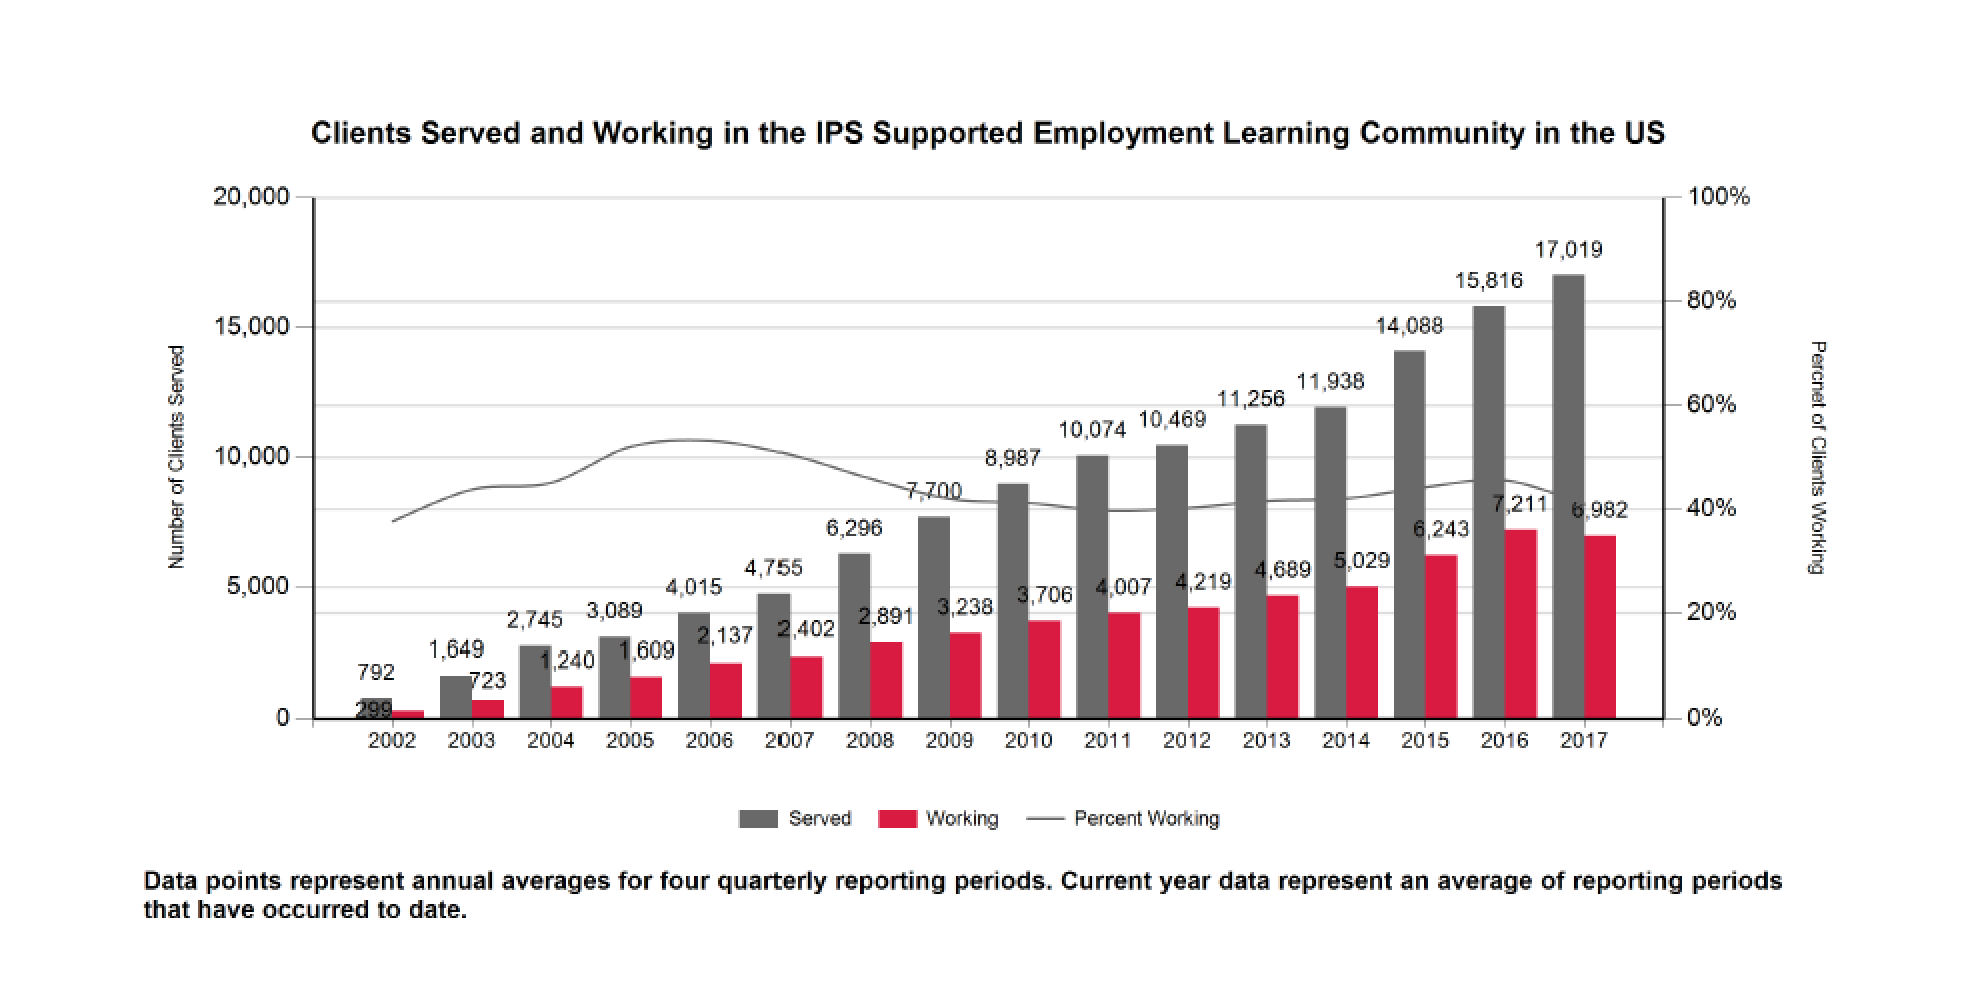 Clients served & working in the IPS Learning Community in the US